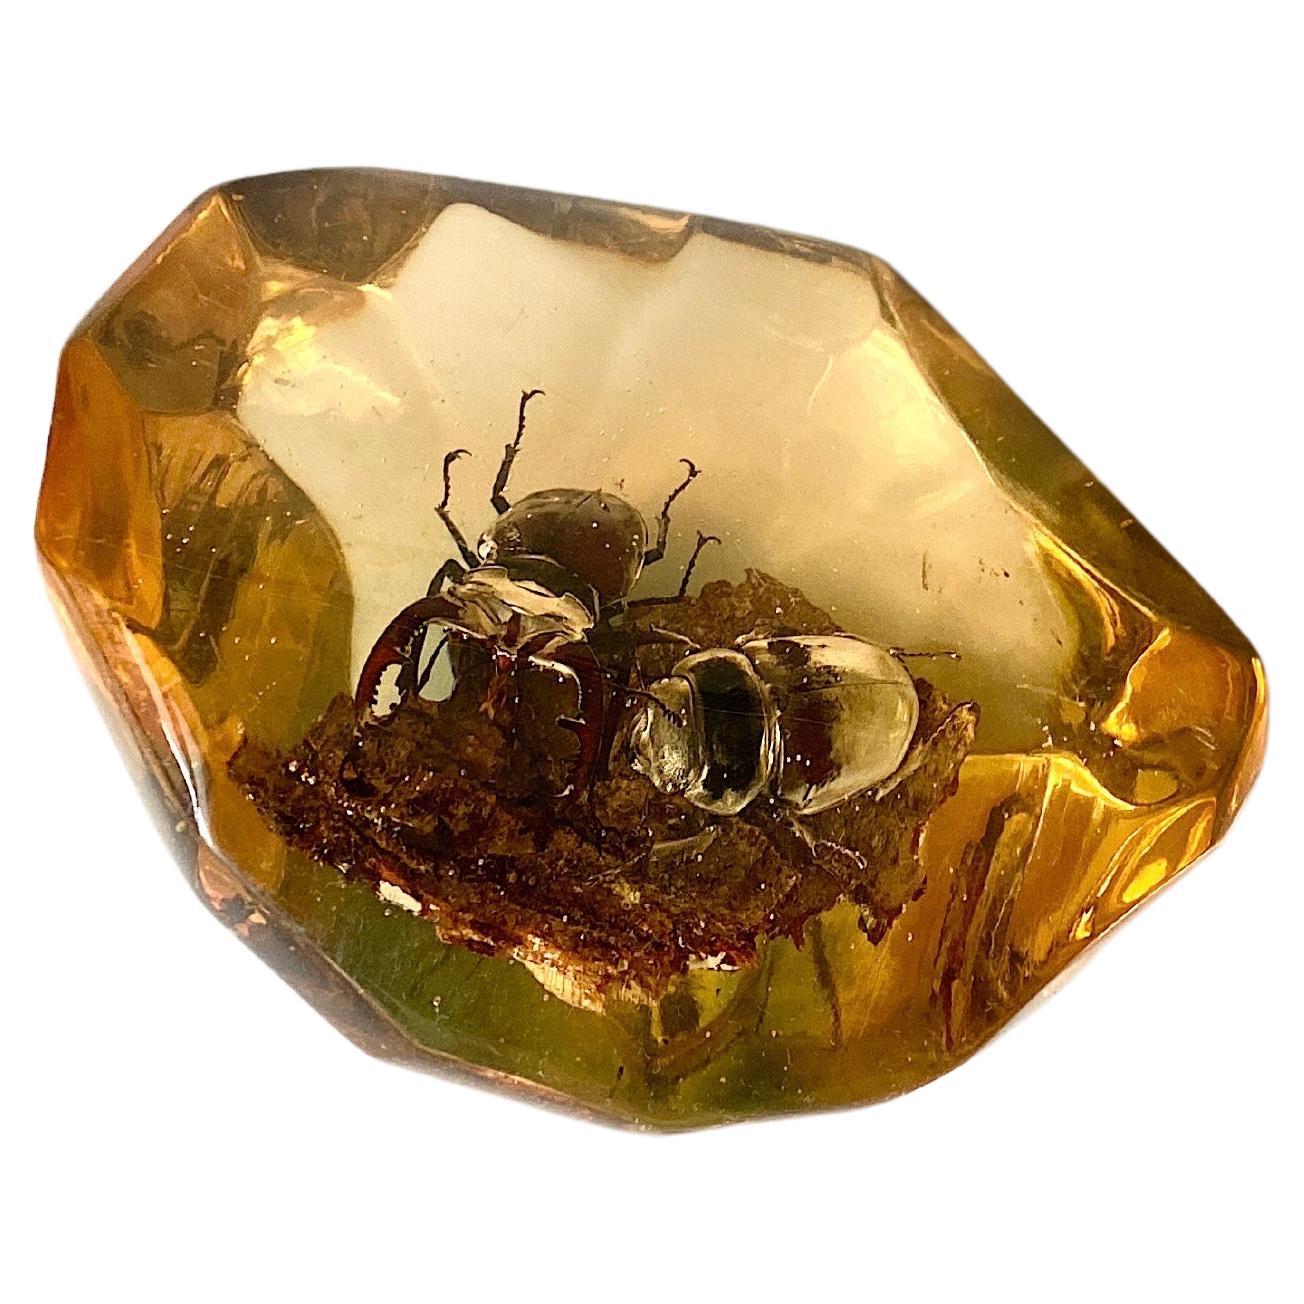 This item is a sculpture, made in France circa 1970. It is a cube of resin, with in the inside an inclusion of an beetles.